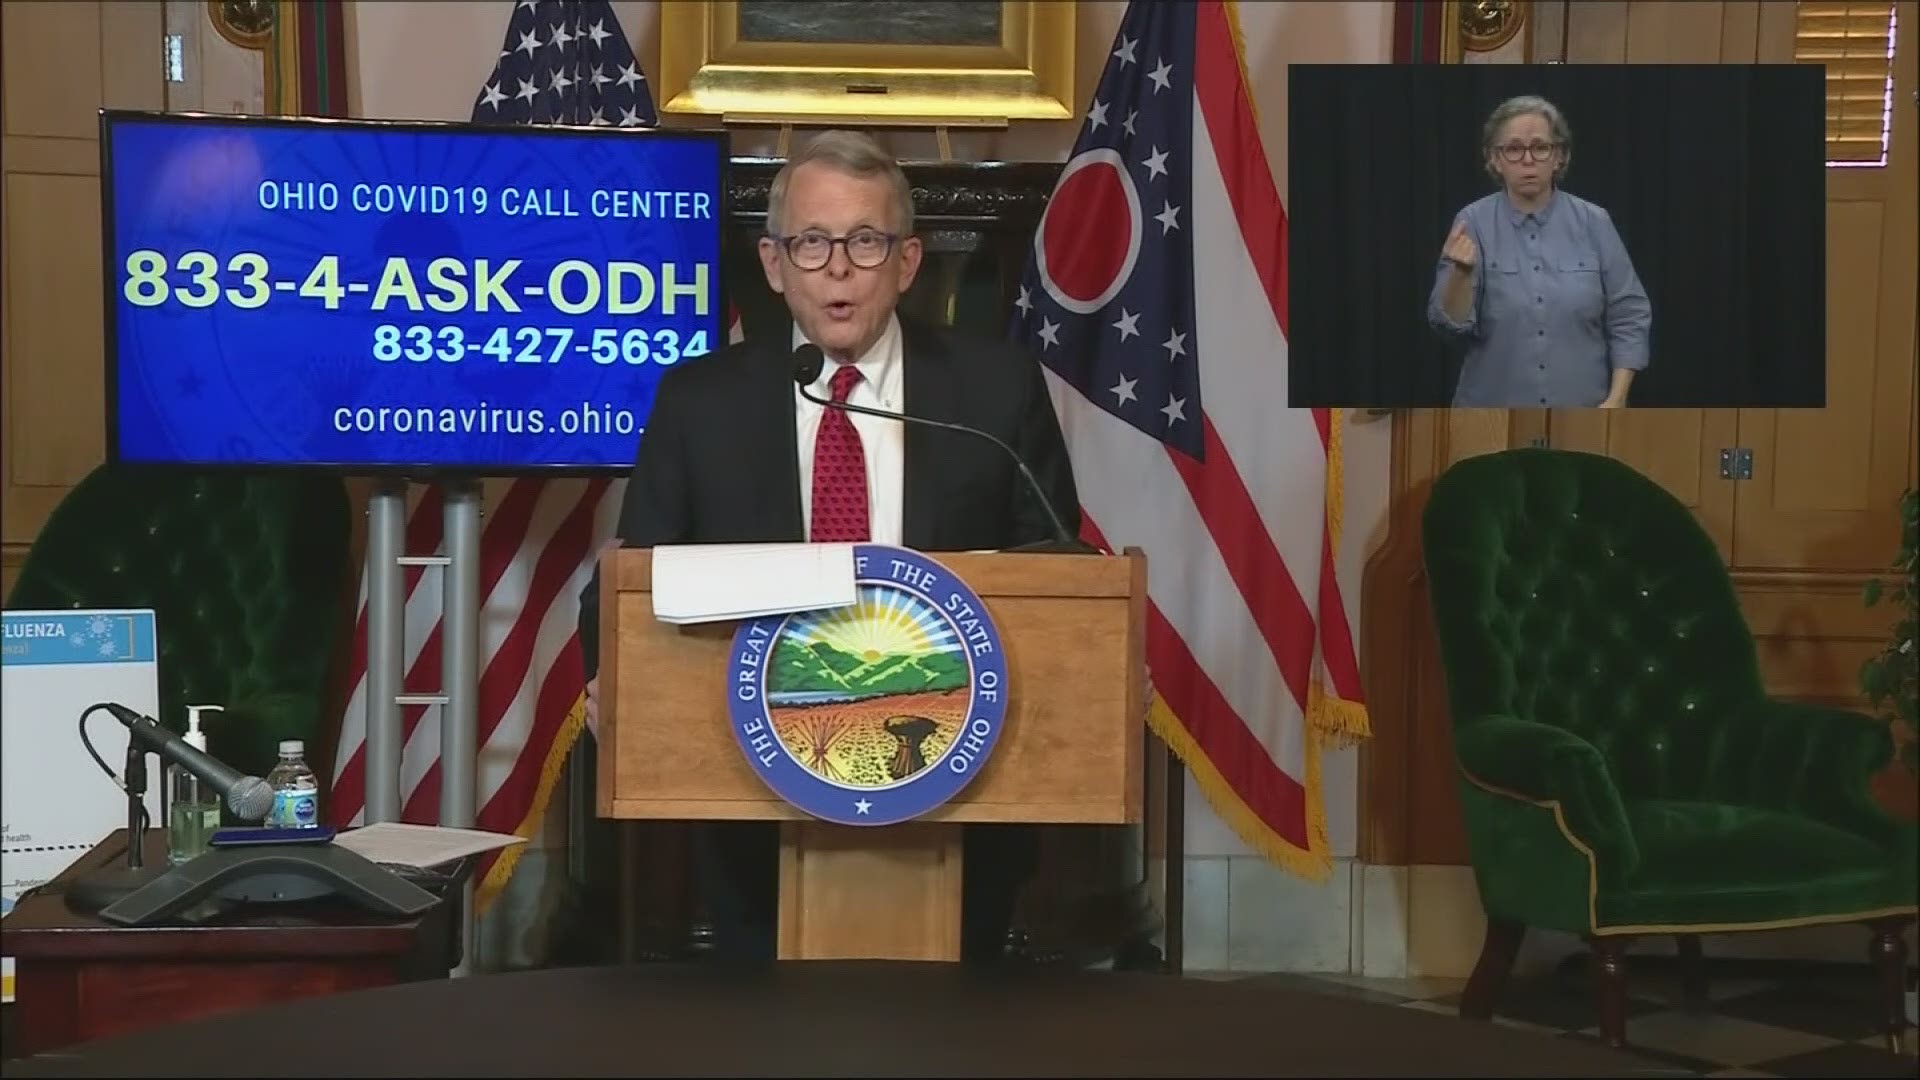 DeWine just announced that Dr. Acton just signed a stay at home order for Ohioans. "We are Ohioans, we are Buckeyes, we are strong!"